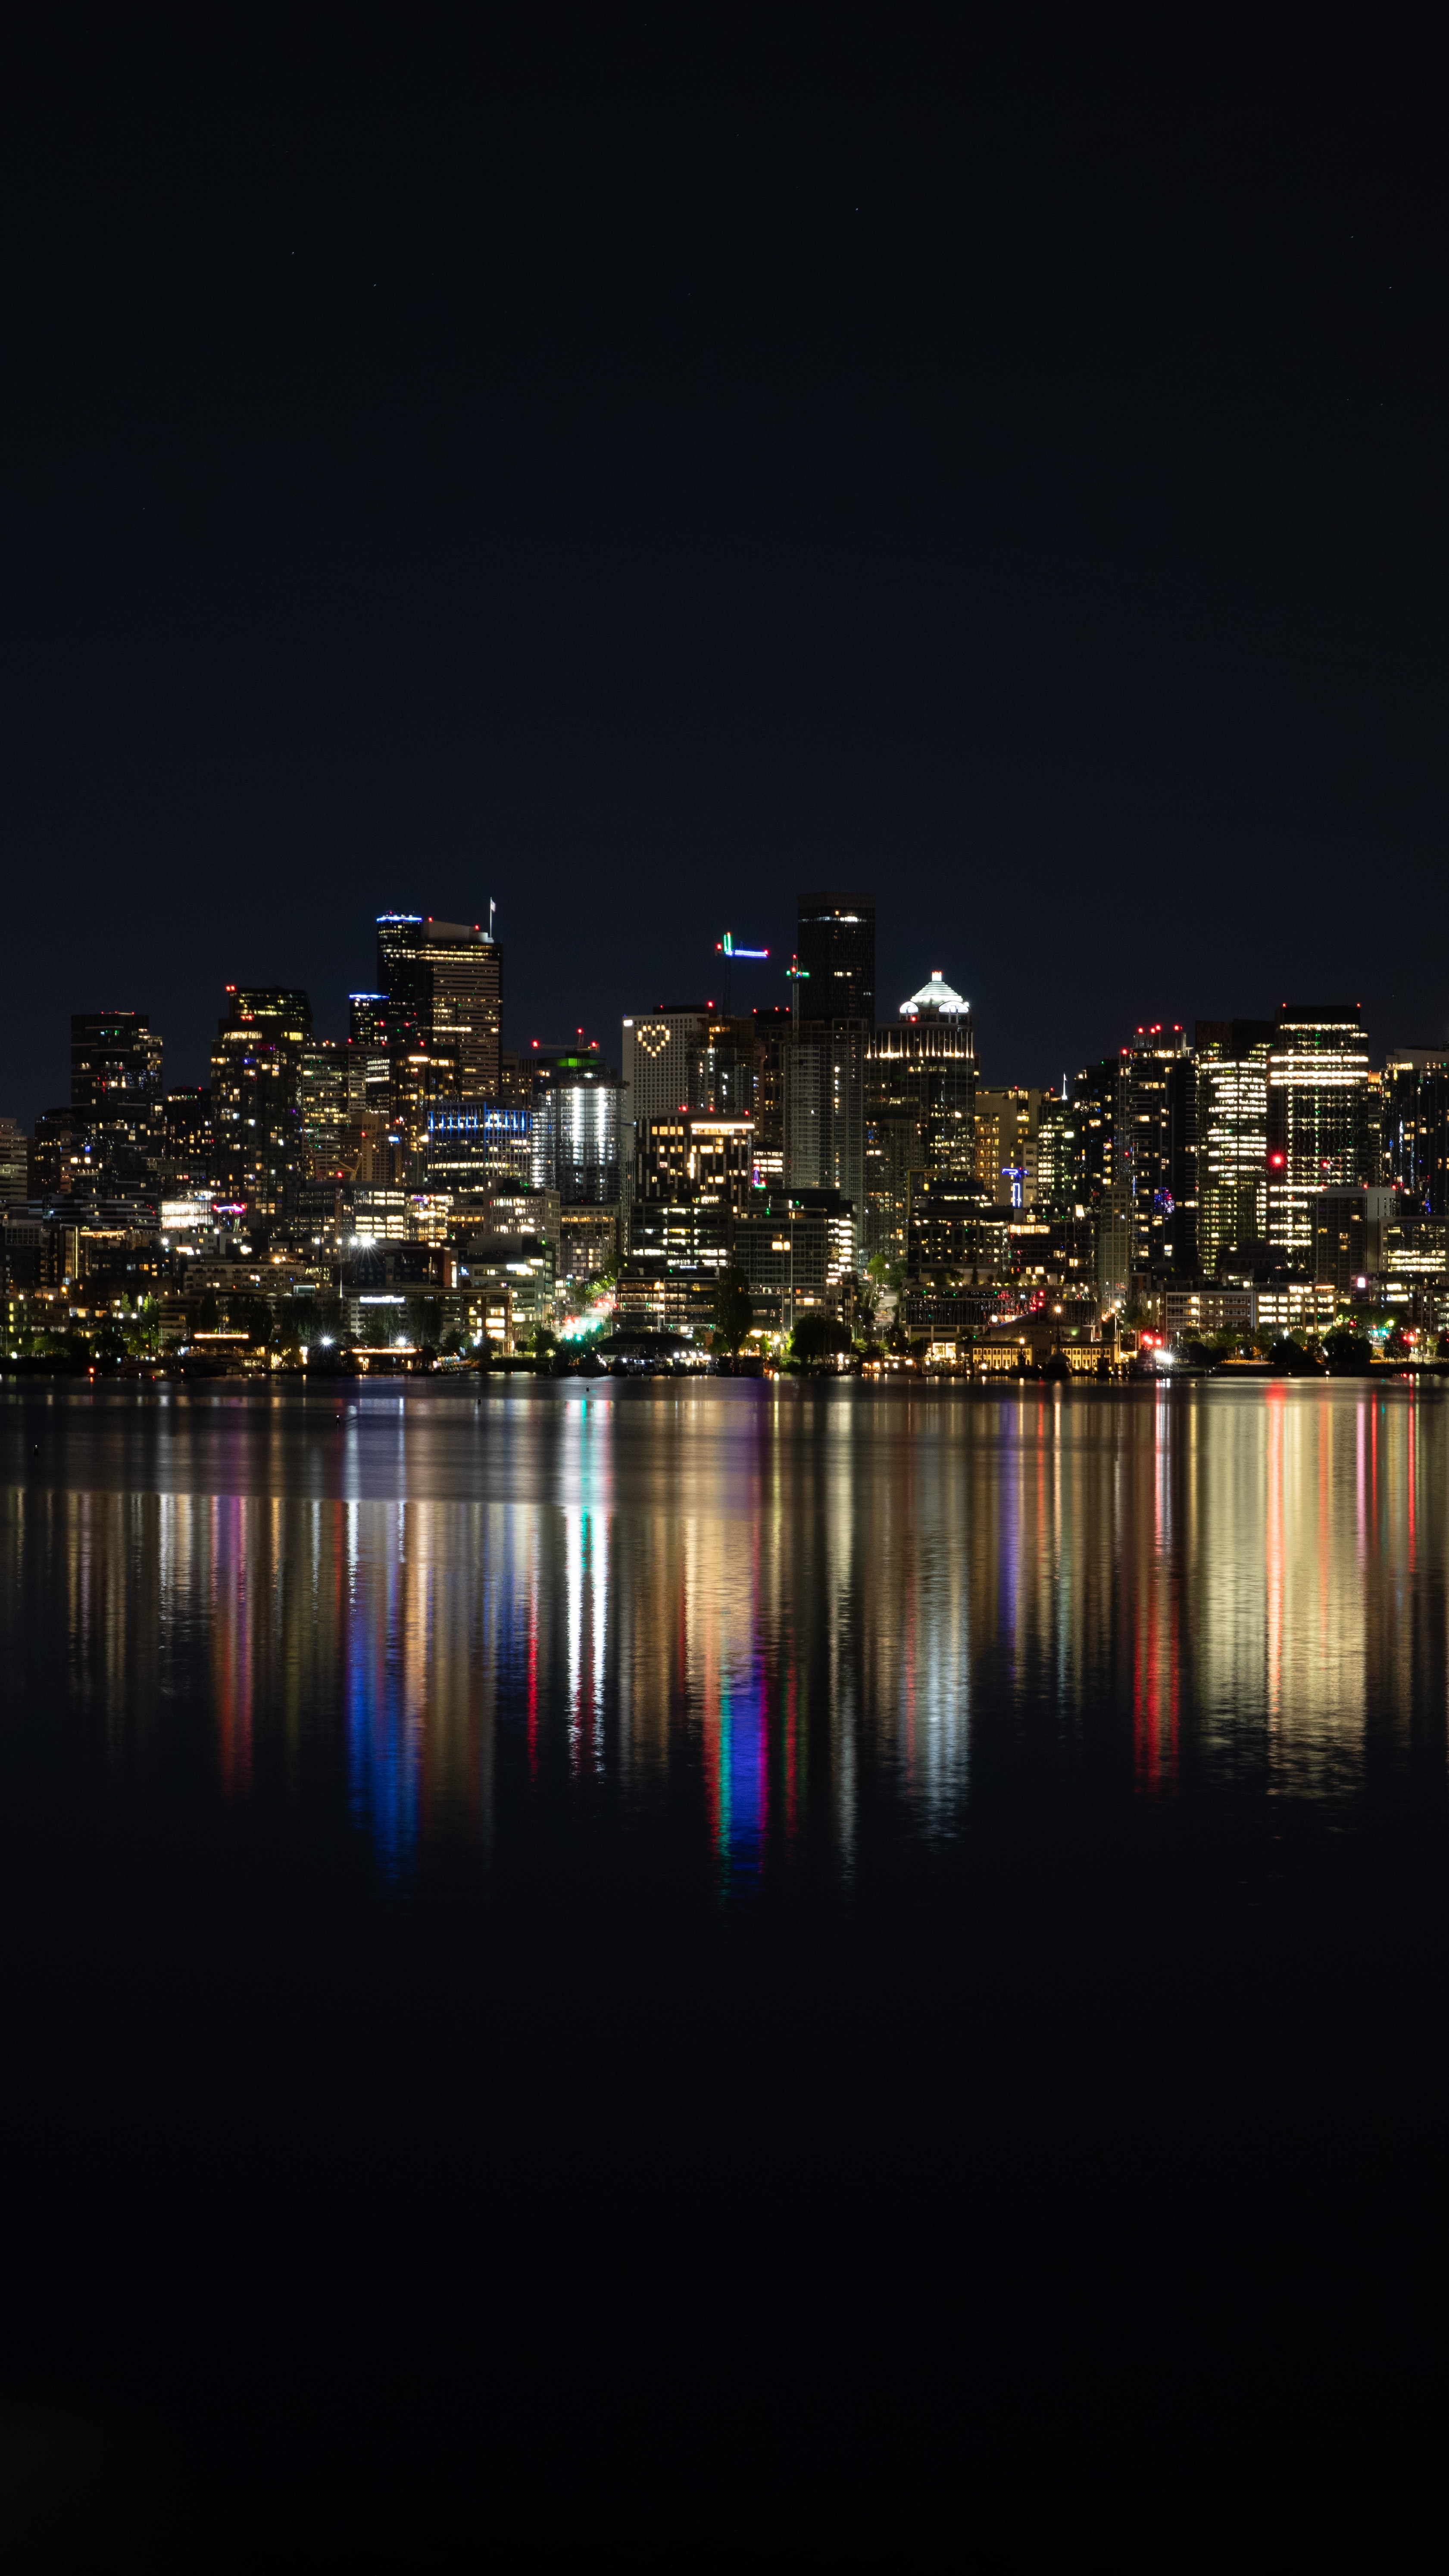 New Lock Screen Wallpapers coast, megalopolis, cities, night, city, building, reflection, megapolis